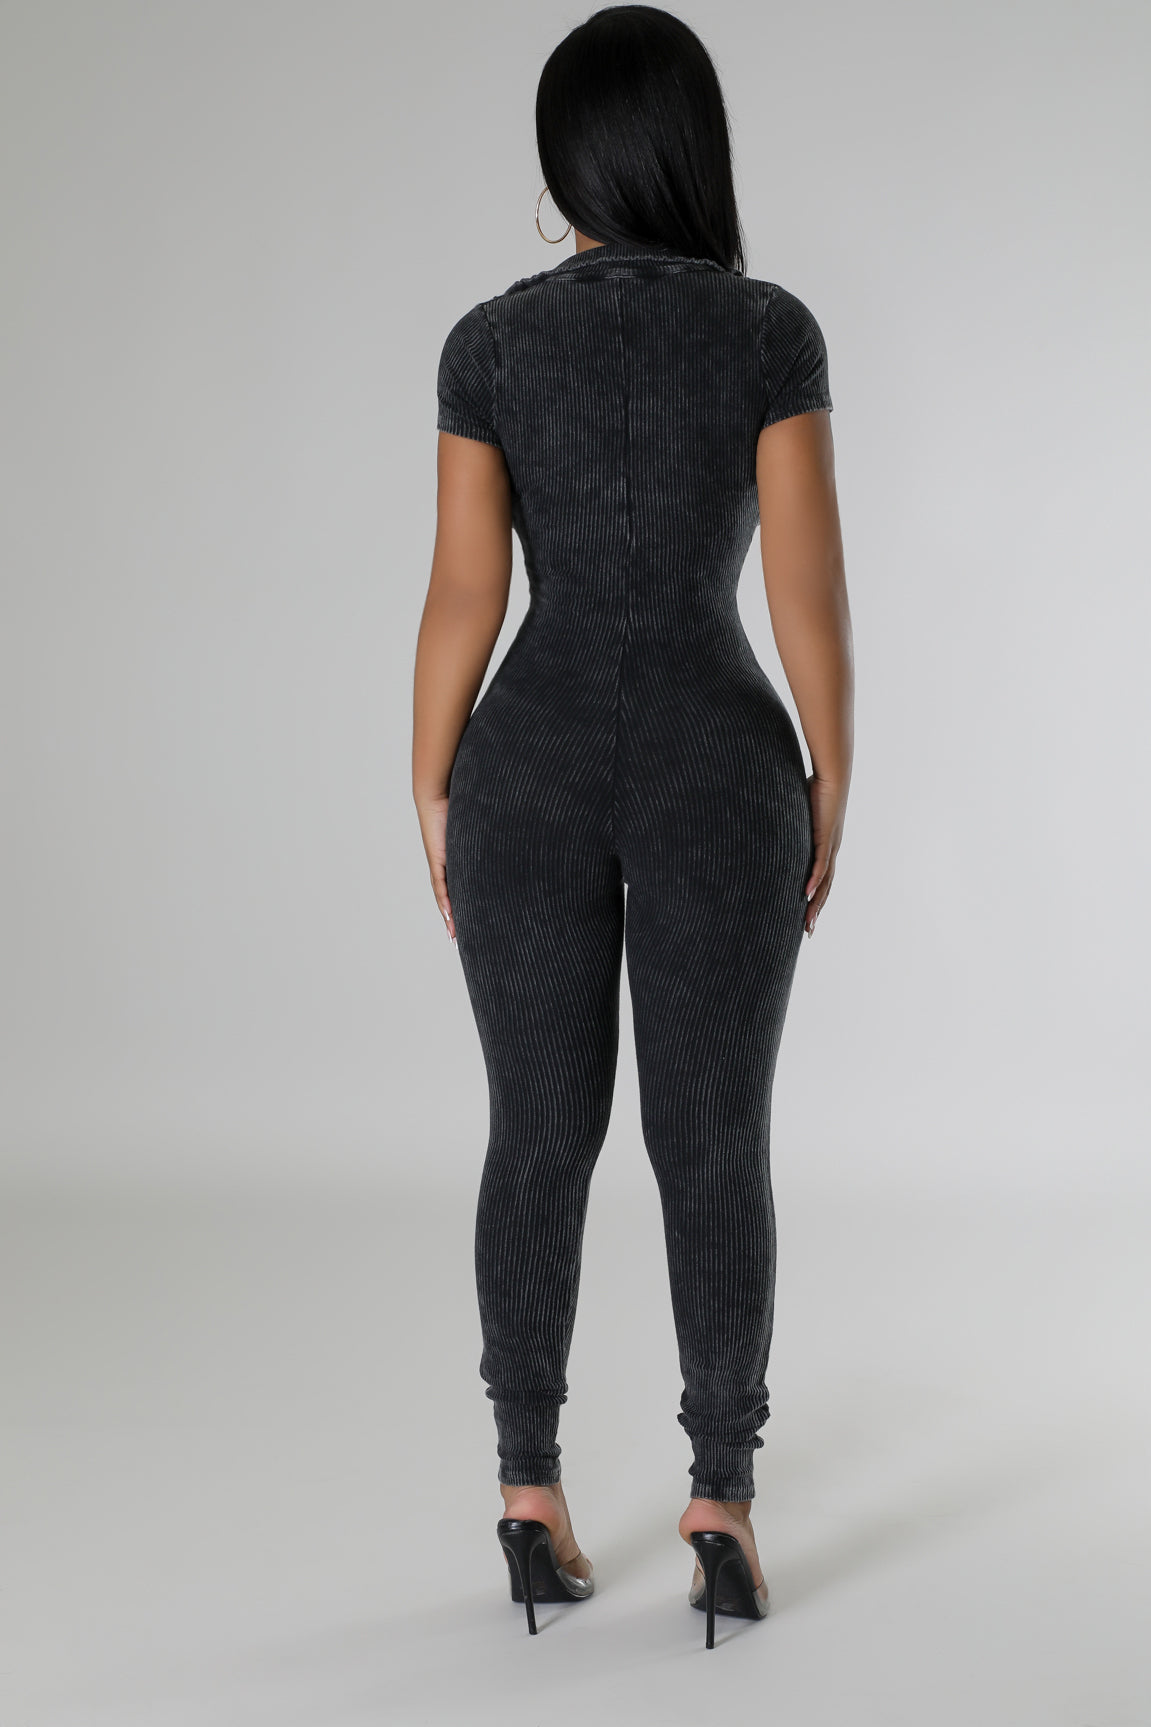 Body Moves Jumpsuit